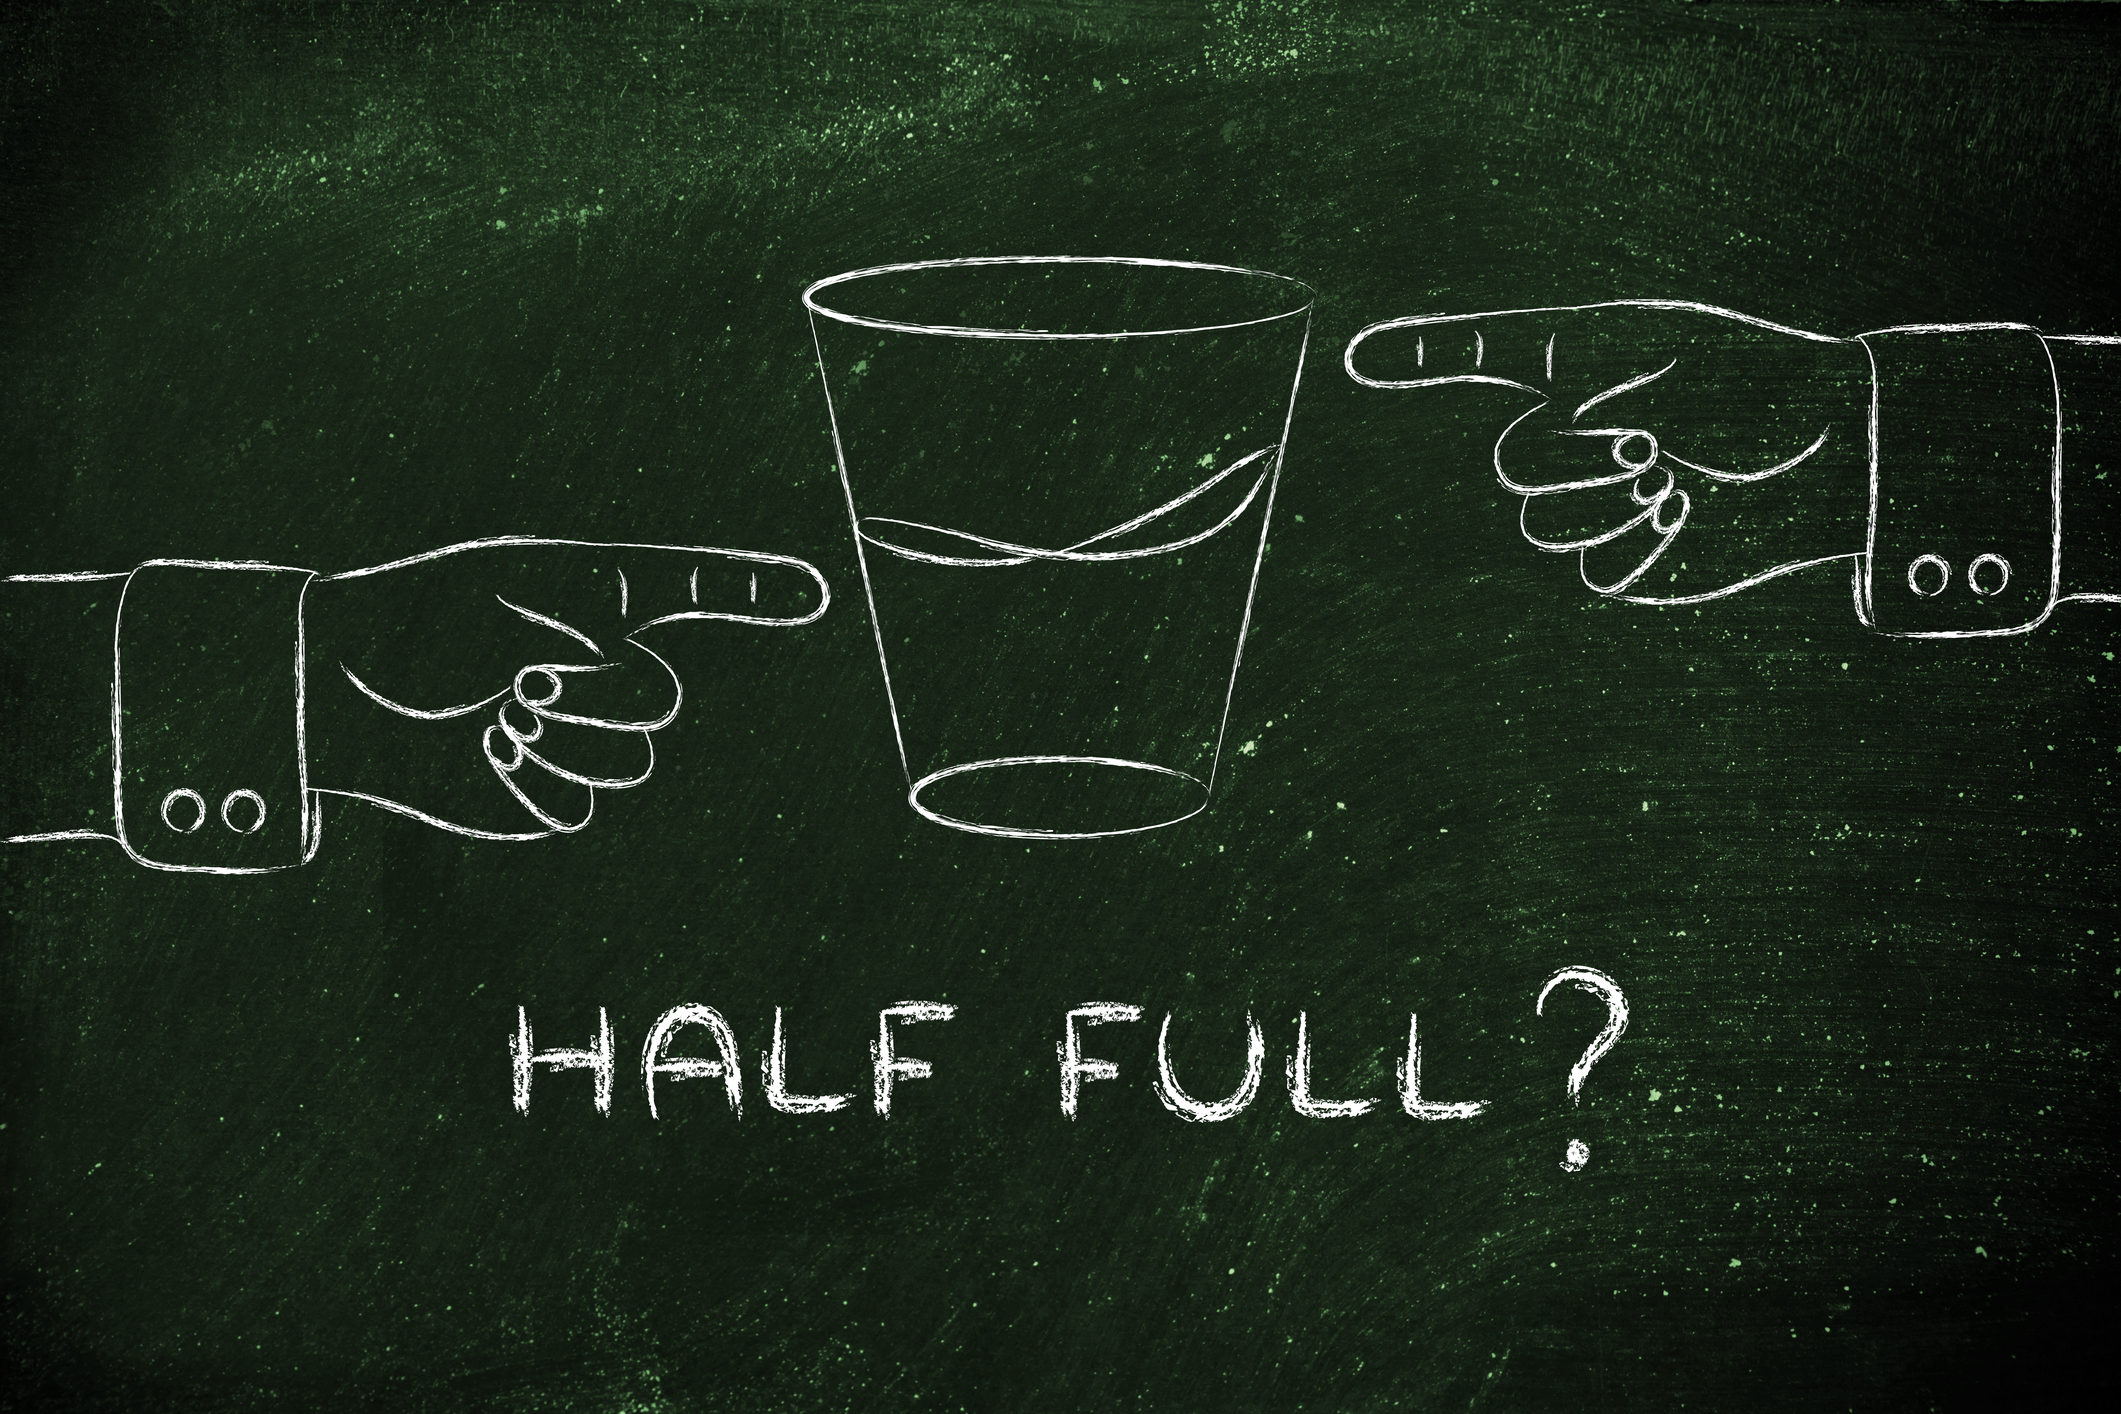 Illustration of two hands pointing at a glass half full of liquid. Caption says 'Half full?'.